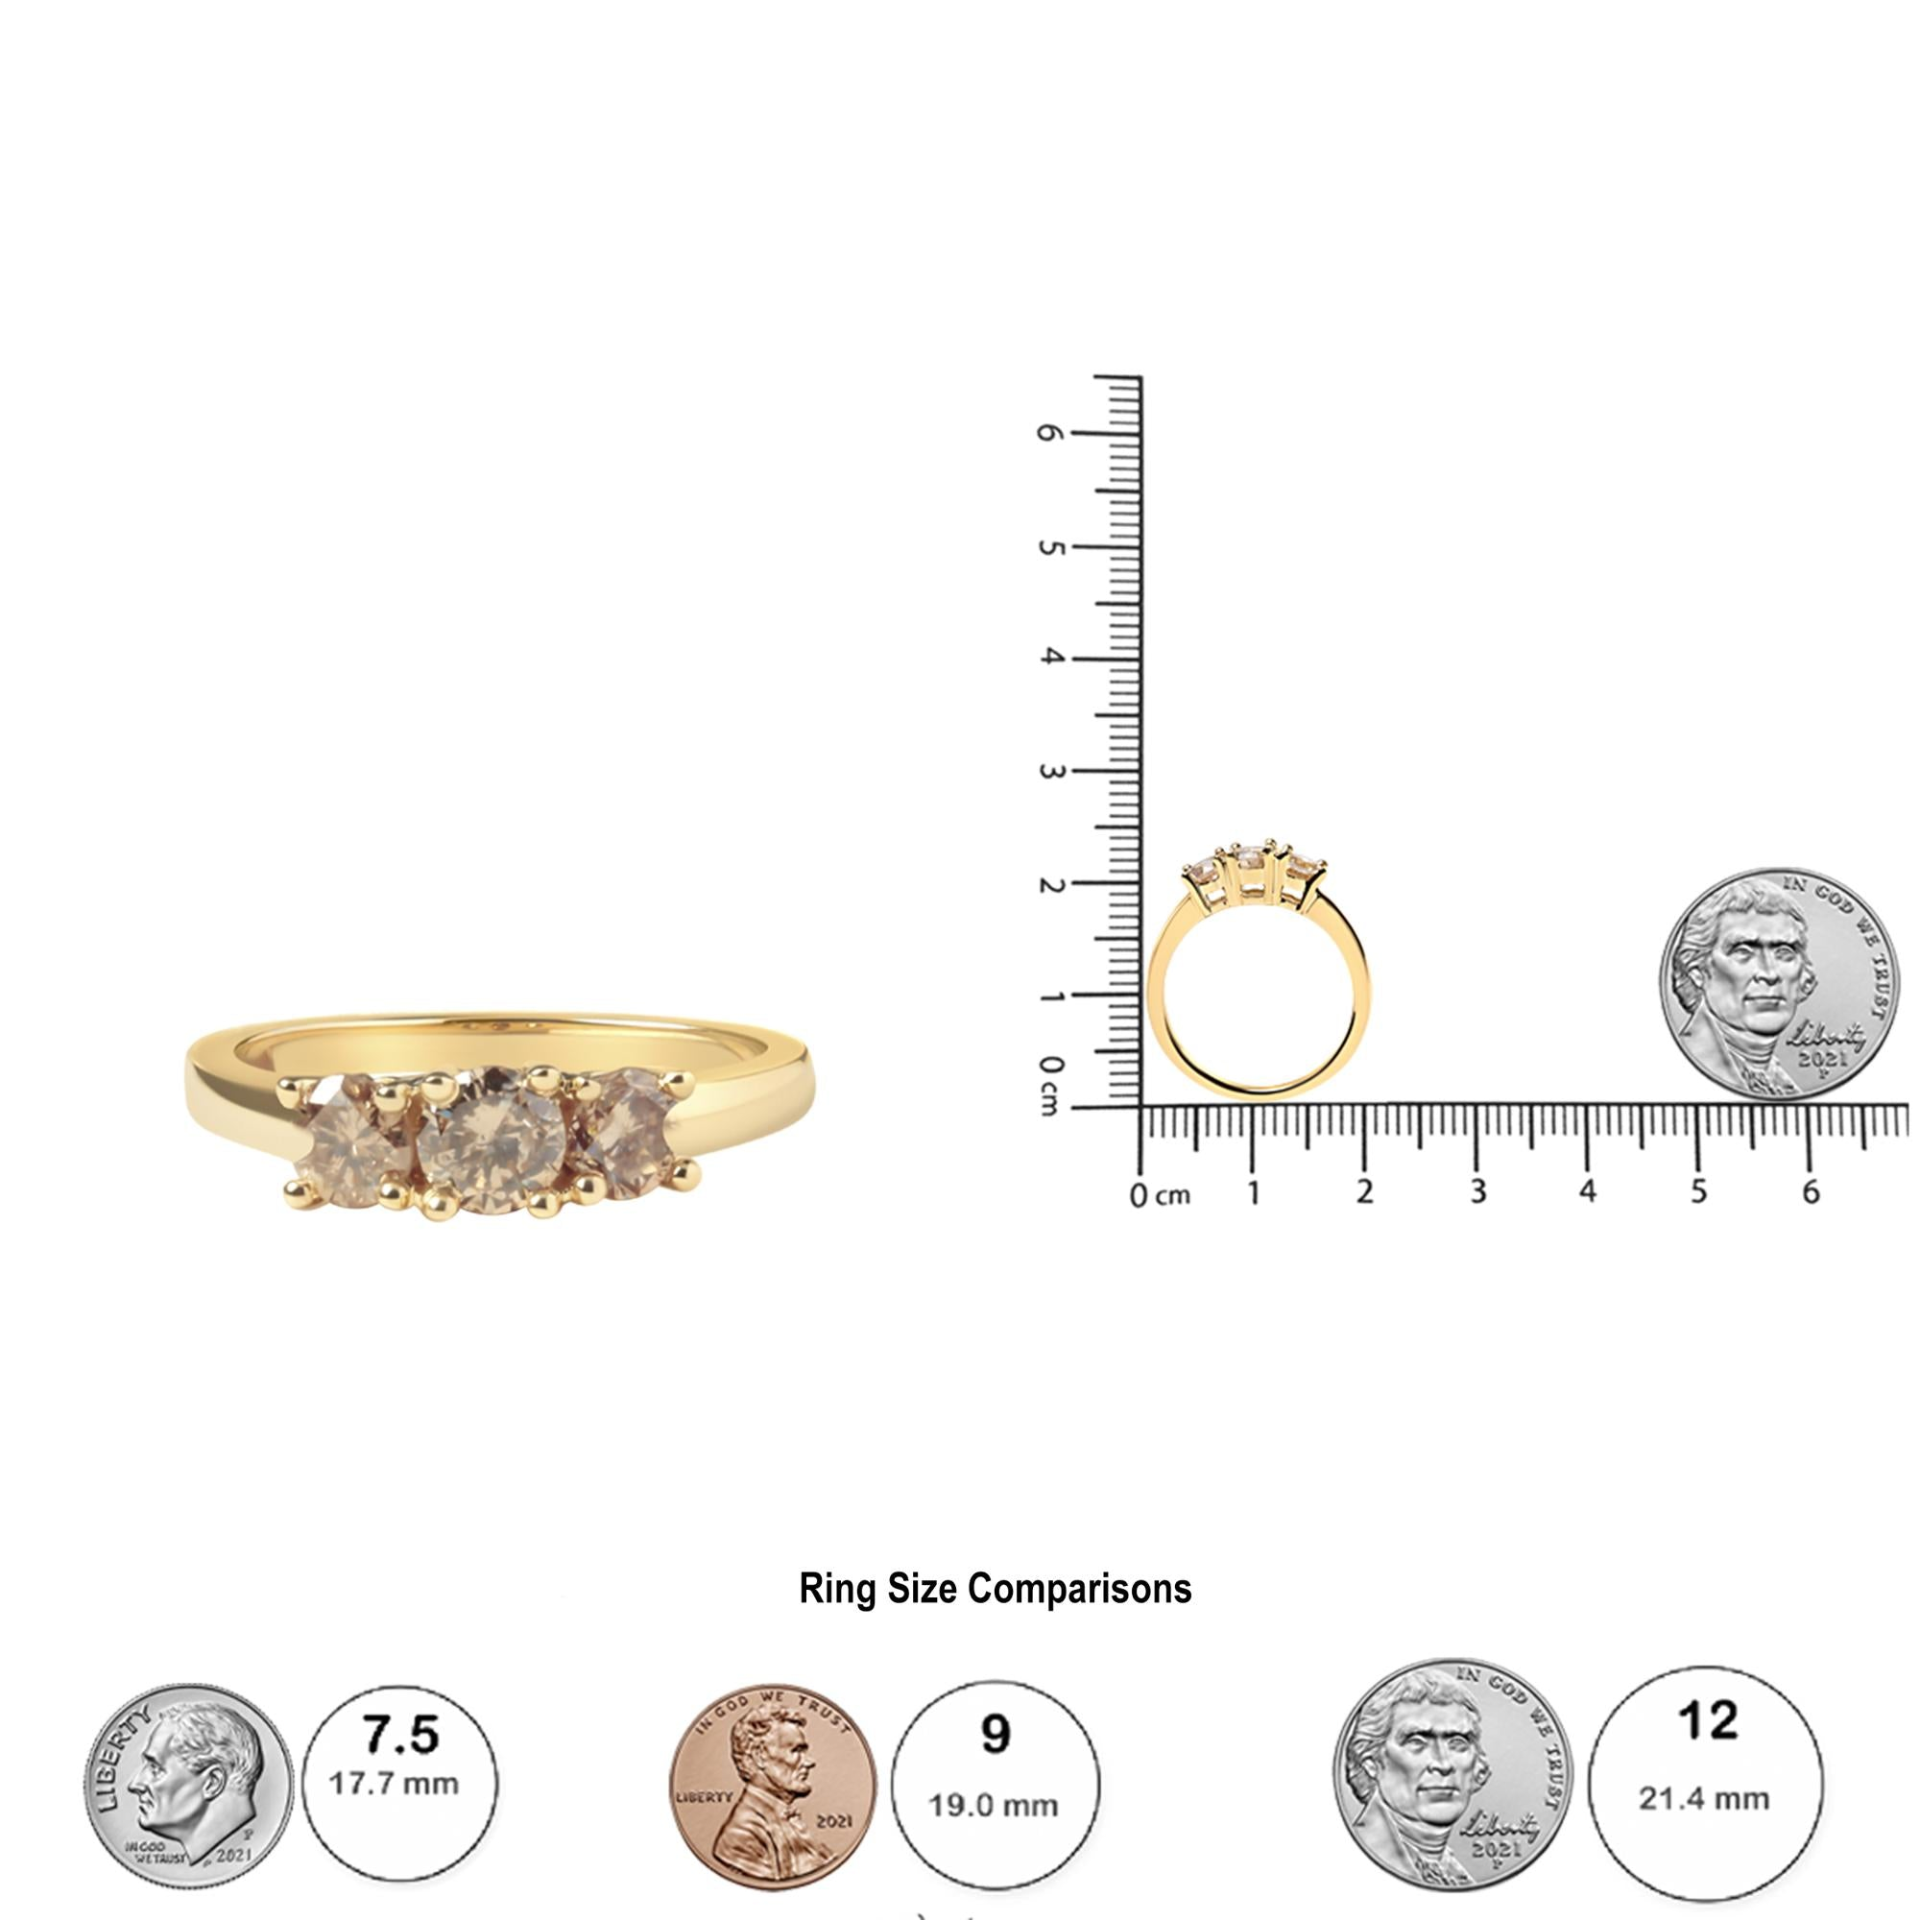 10K Yellow Gold 1.00 Cttw Champagne Diamond 3-Stone Band Ring (J-K Color, I1-I2 Clarity), Goodies N Stuff